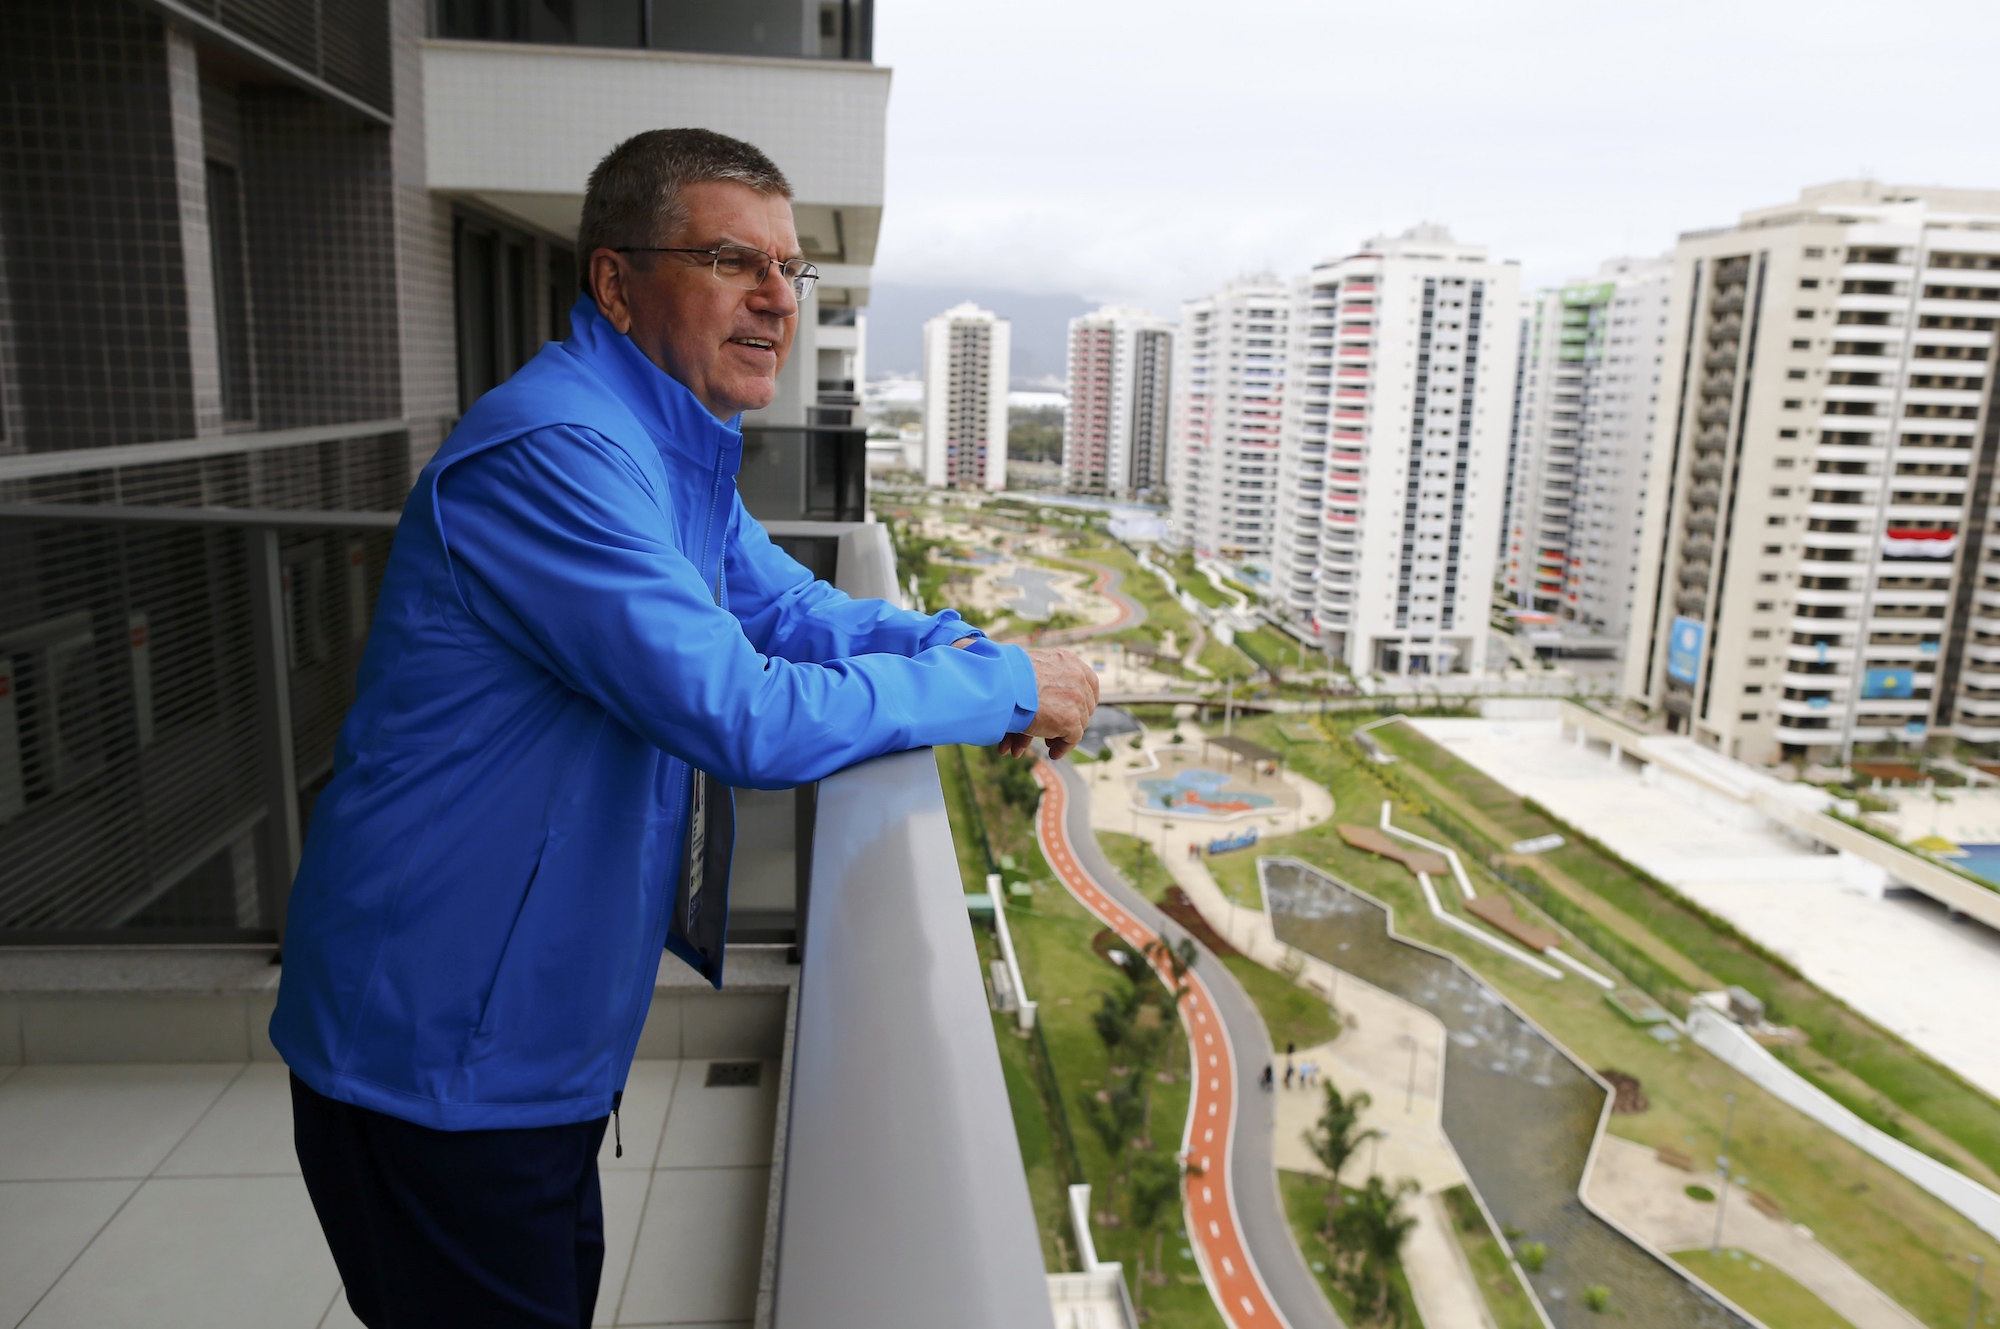 International Olympic Committee (IOC) President Thomas Bach looks from his balcony after moving into the Olympic village in Rio de Janeiro, Brazil, July 28, 2016. REUTERS/Ivan Alvarado TPX IMAGES OF THE DAY. FOR EDITORIAL USE ONLY. NOT FOR SALE FOR MARKETING OR ADVERTISING CAMPAIGNS.